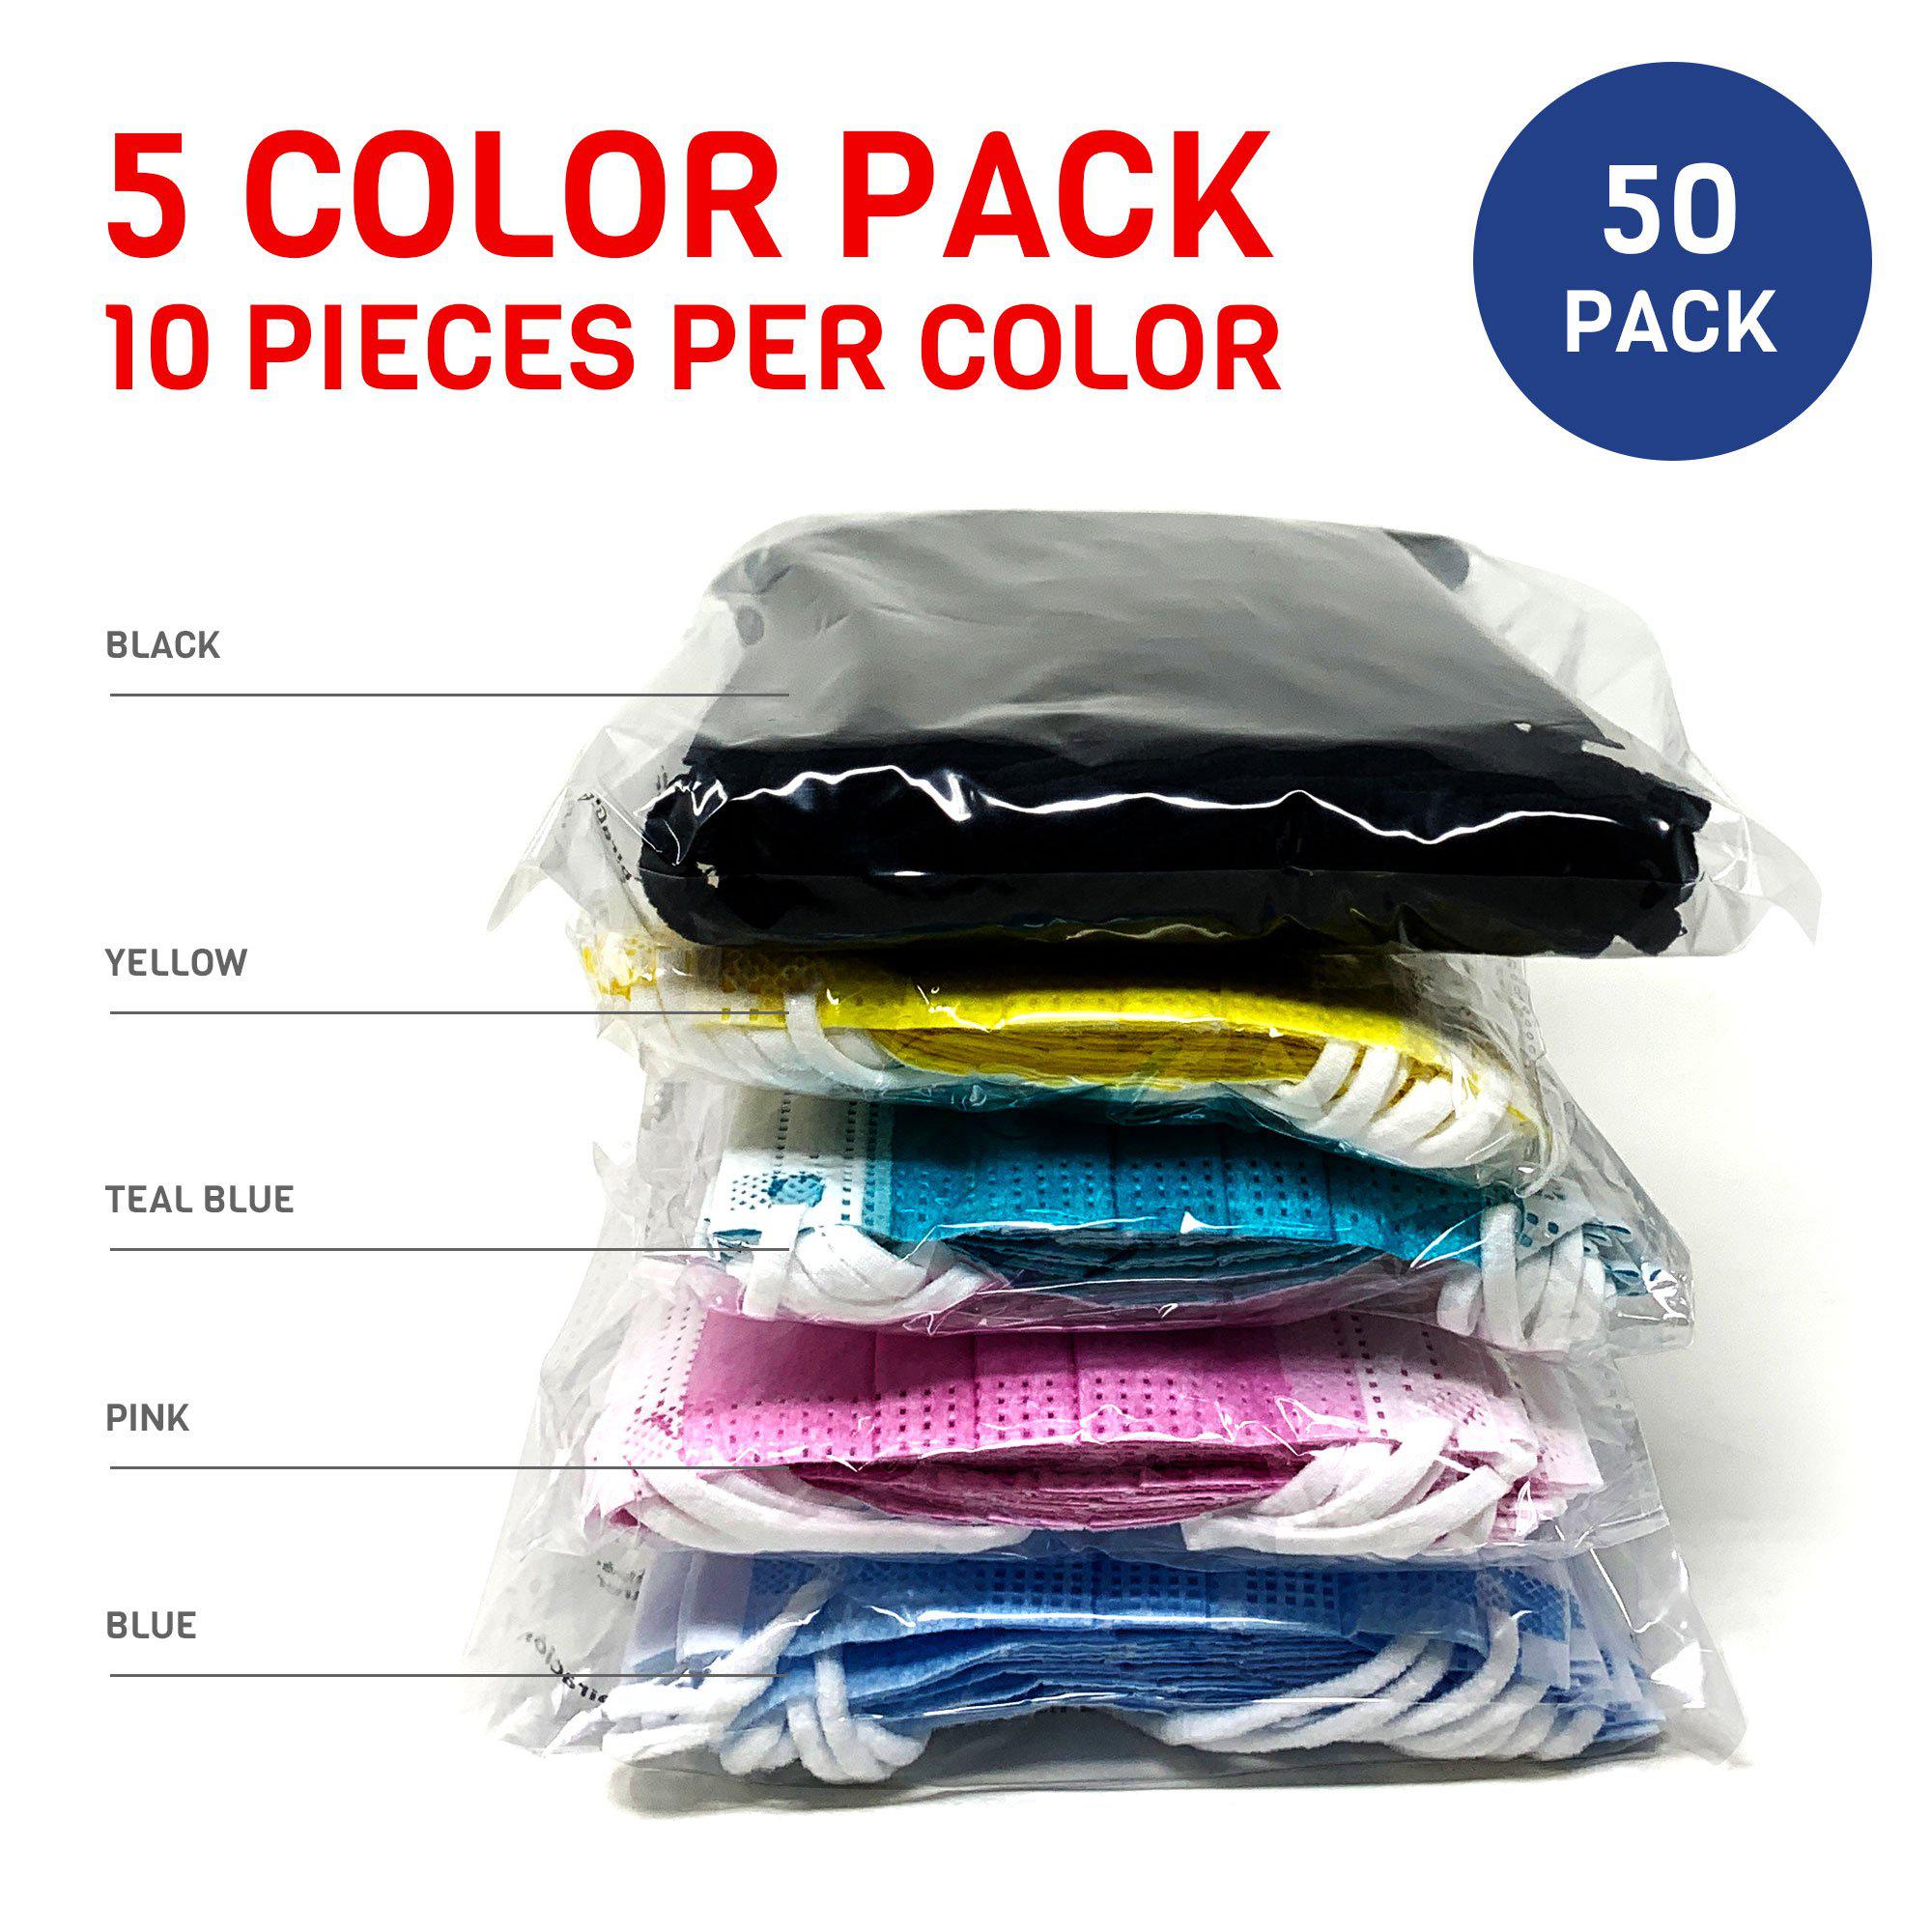 Casaba 50 Pack with 5 Colors Disposable Face Masks 3-Ply - Made in USA with Imported Fabric